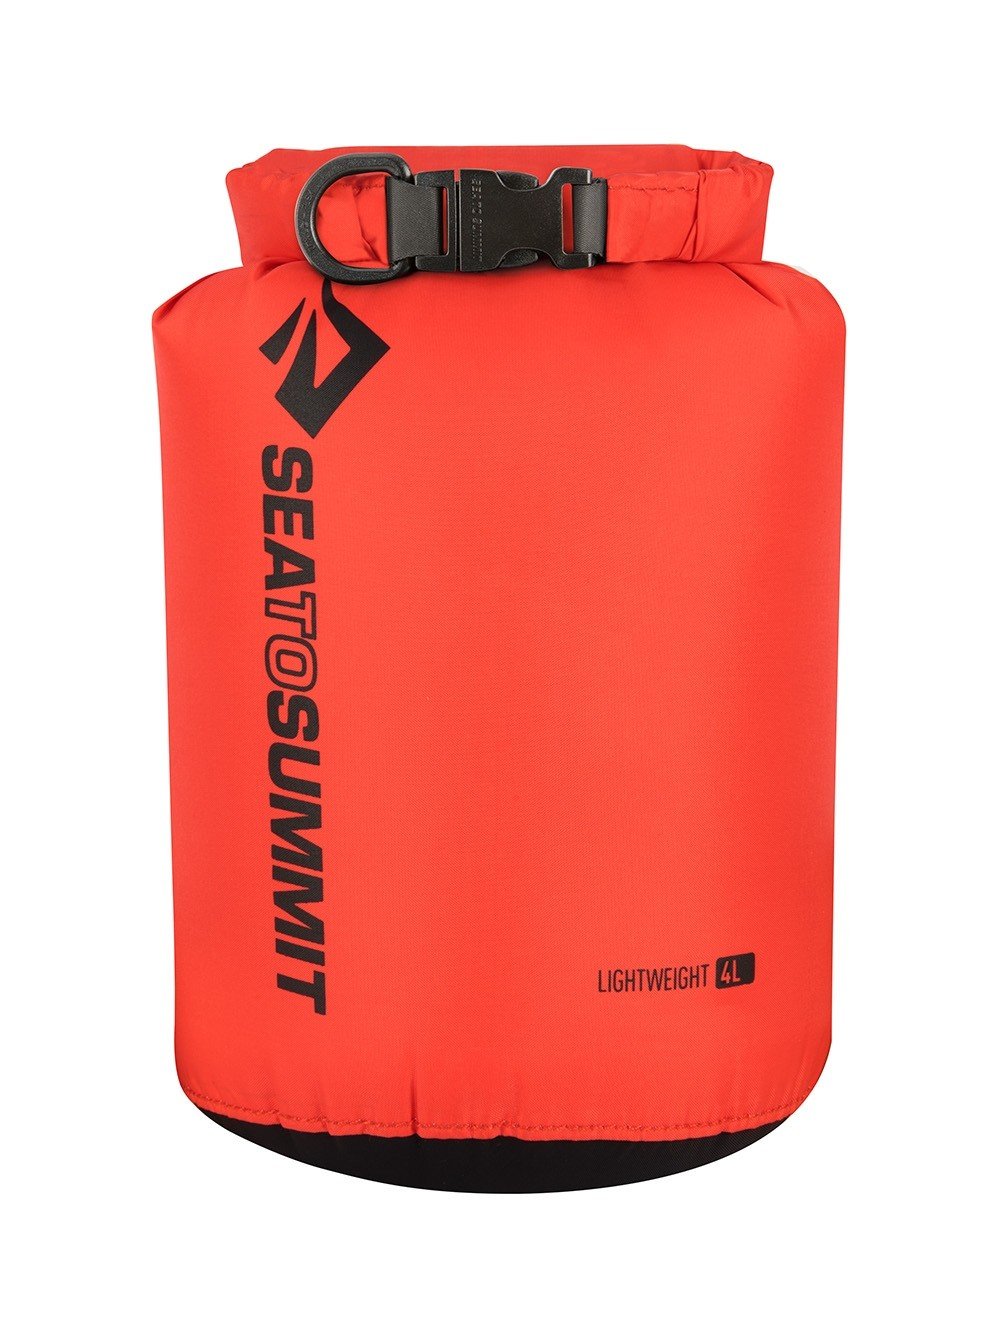 Sea To Summit Lightweight 70D 4 Litres Dry Sack Bags, Packs and Cases Sea To Summit Red Tactical Gear Supplier Tactical Distributors Australia